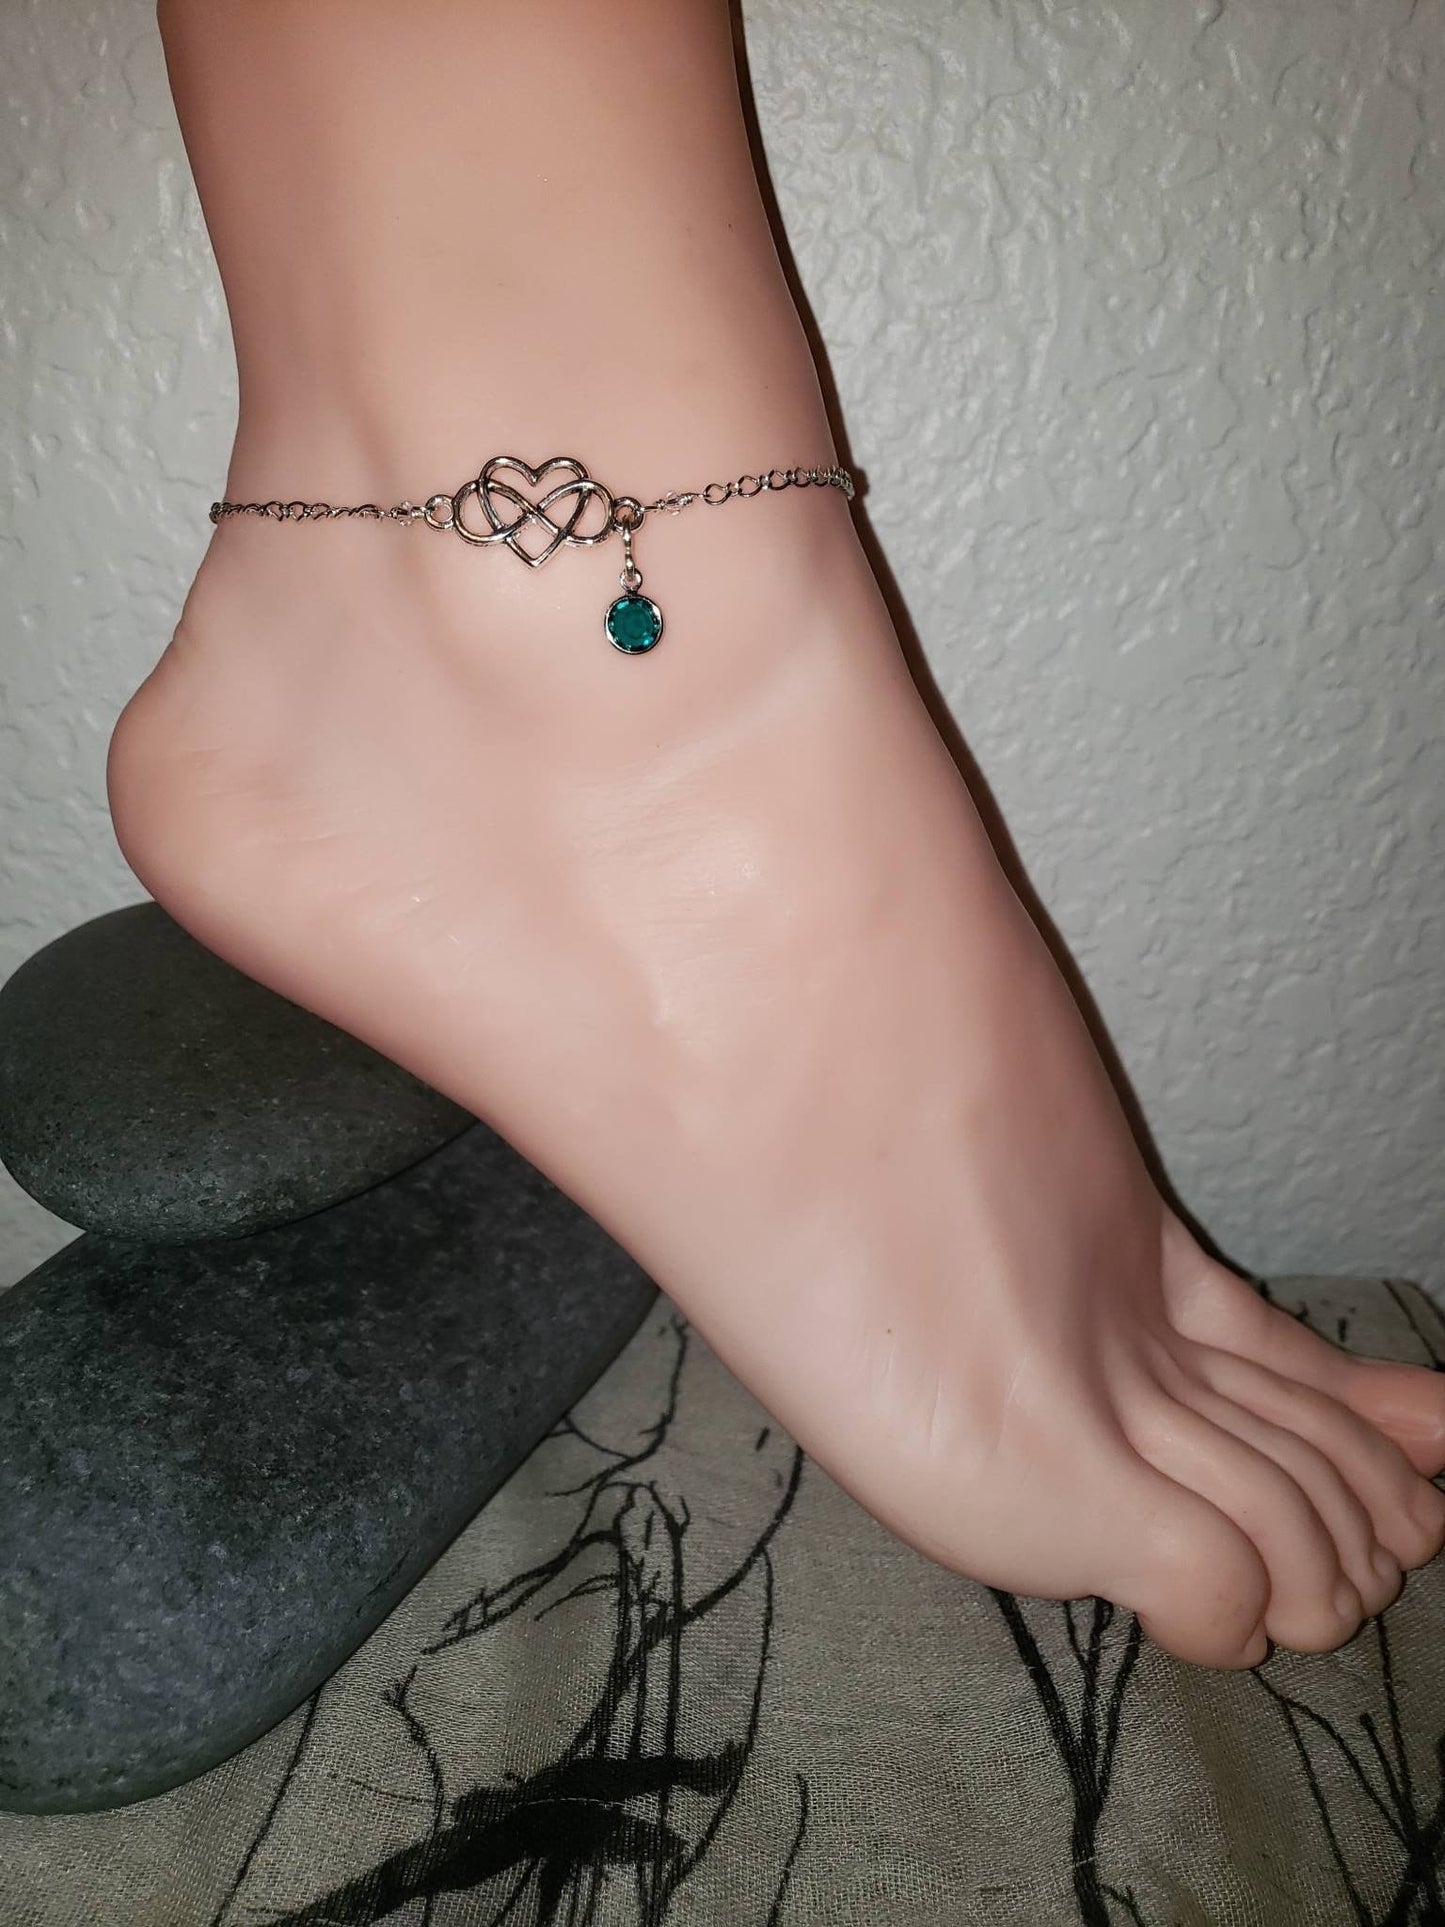 Infinity Heart Anklet, Polyamory Anklet, Stainless Steel Chain, HotWife Anklet, Everyday Anklet, Kinky Anklet, Sexy Anklets, Swinger Jewelry